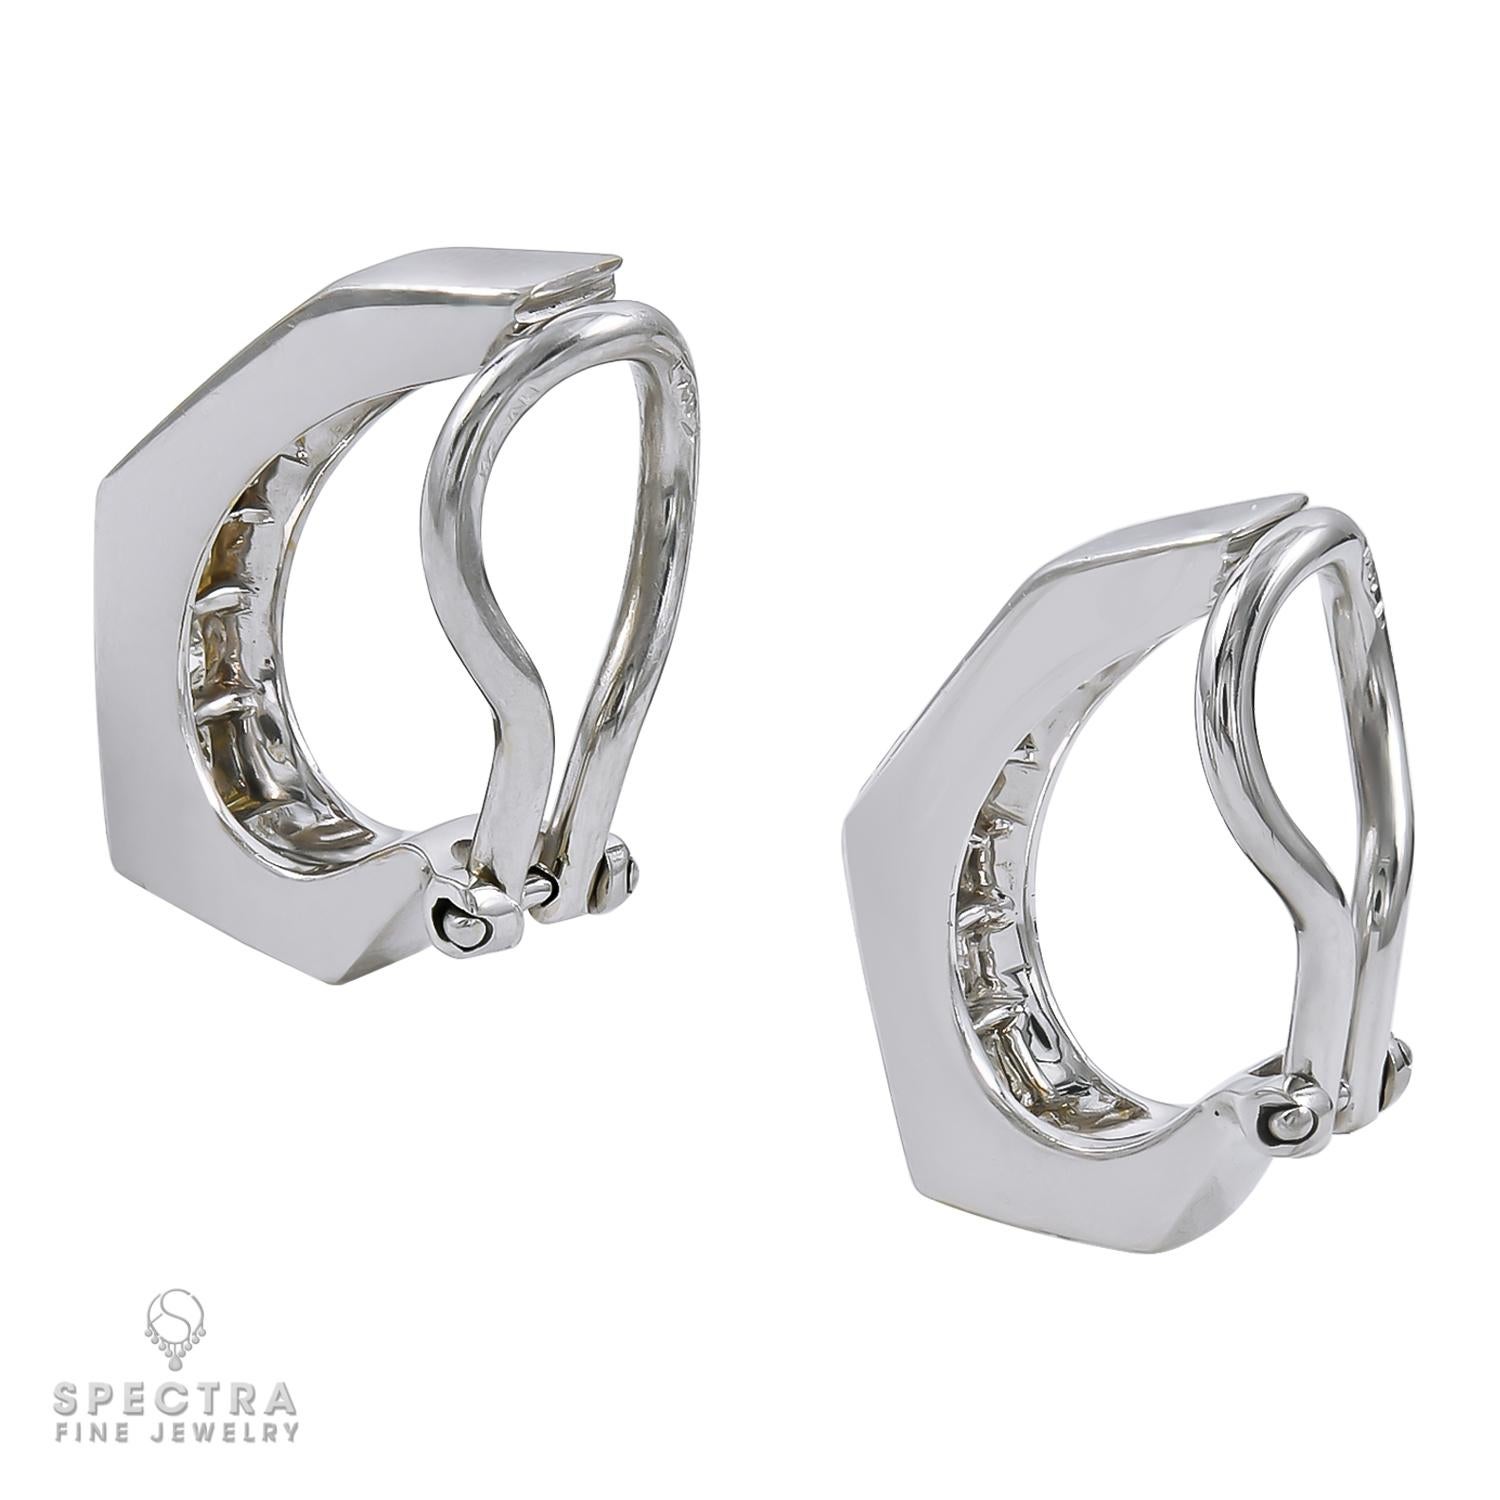 There is something so pleasingly succinct about the geometric design of these ear clips. The repeating concentric squares reflected in a row of diamonds, perfectly lined up and channel set in gleaming 18K white gold, is mesmerizing. In a minimalist